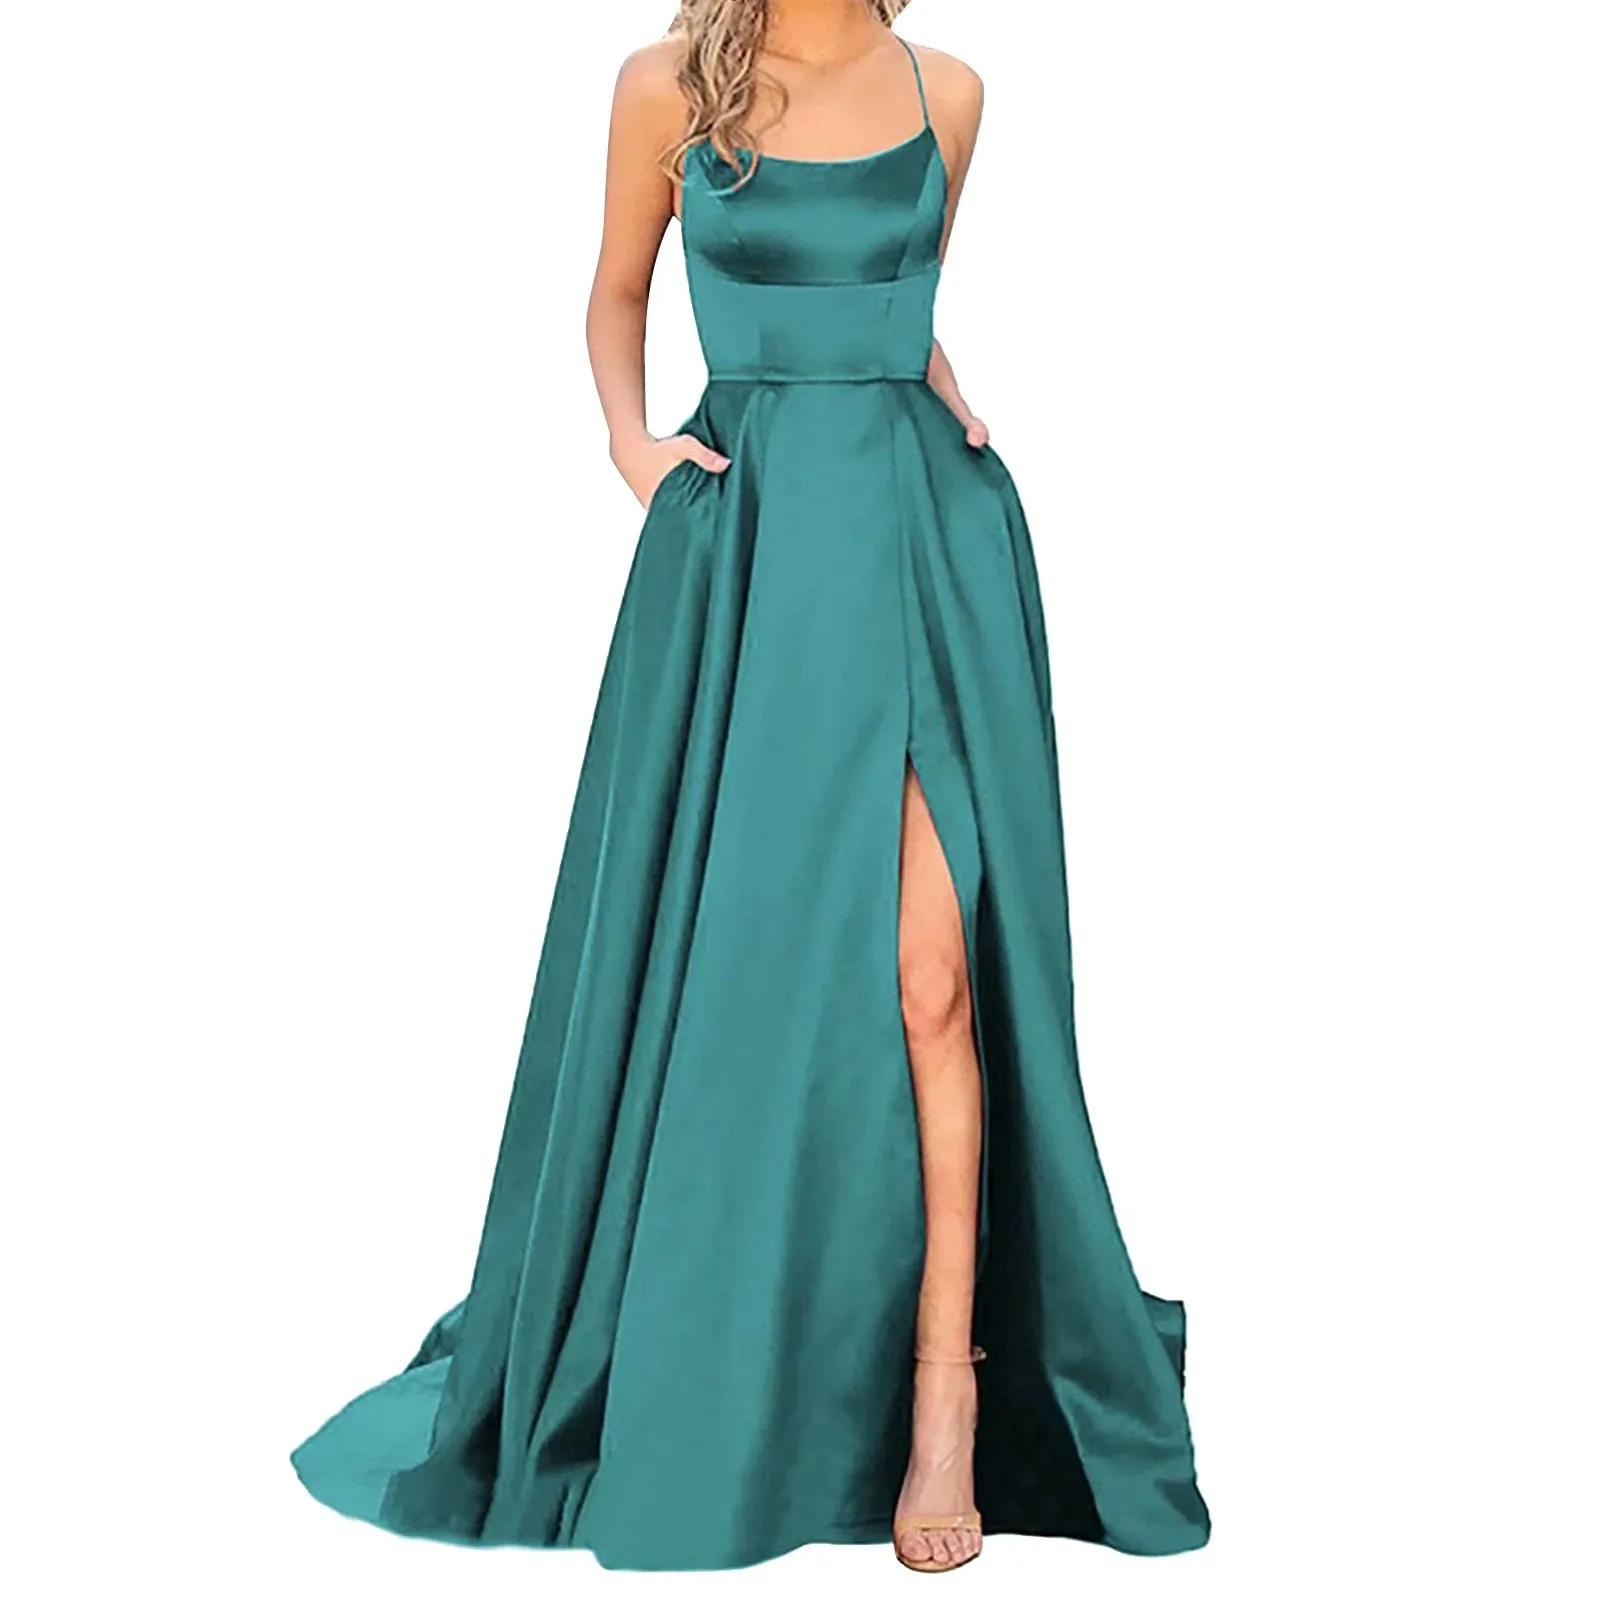 

Elegant Hight Split Evening Maxi Dress Sexy Lace-Up Backless Long Dresses Solid Color leeveless High Waist Party Dress Robe